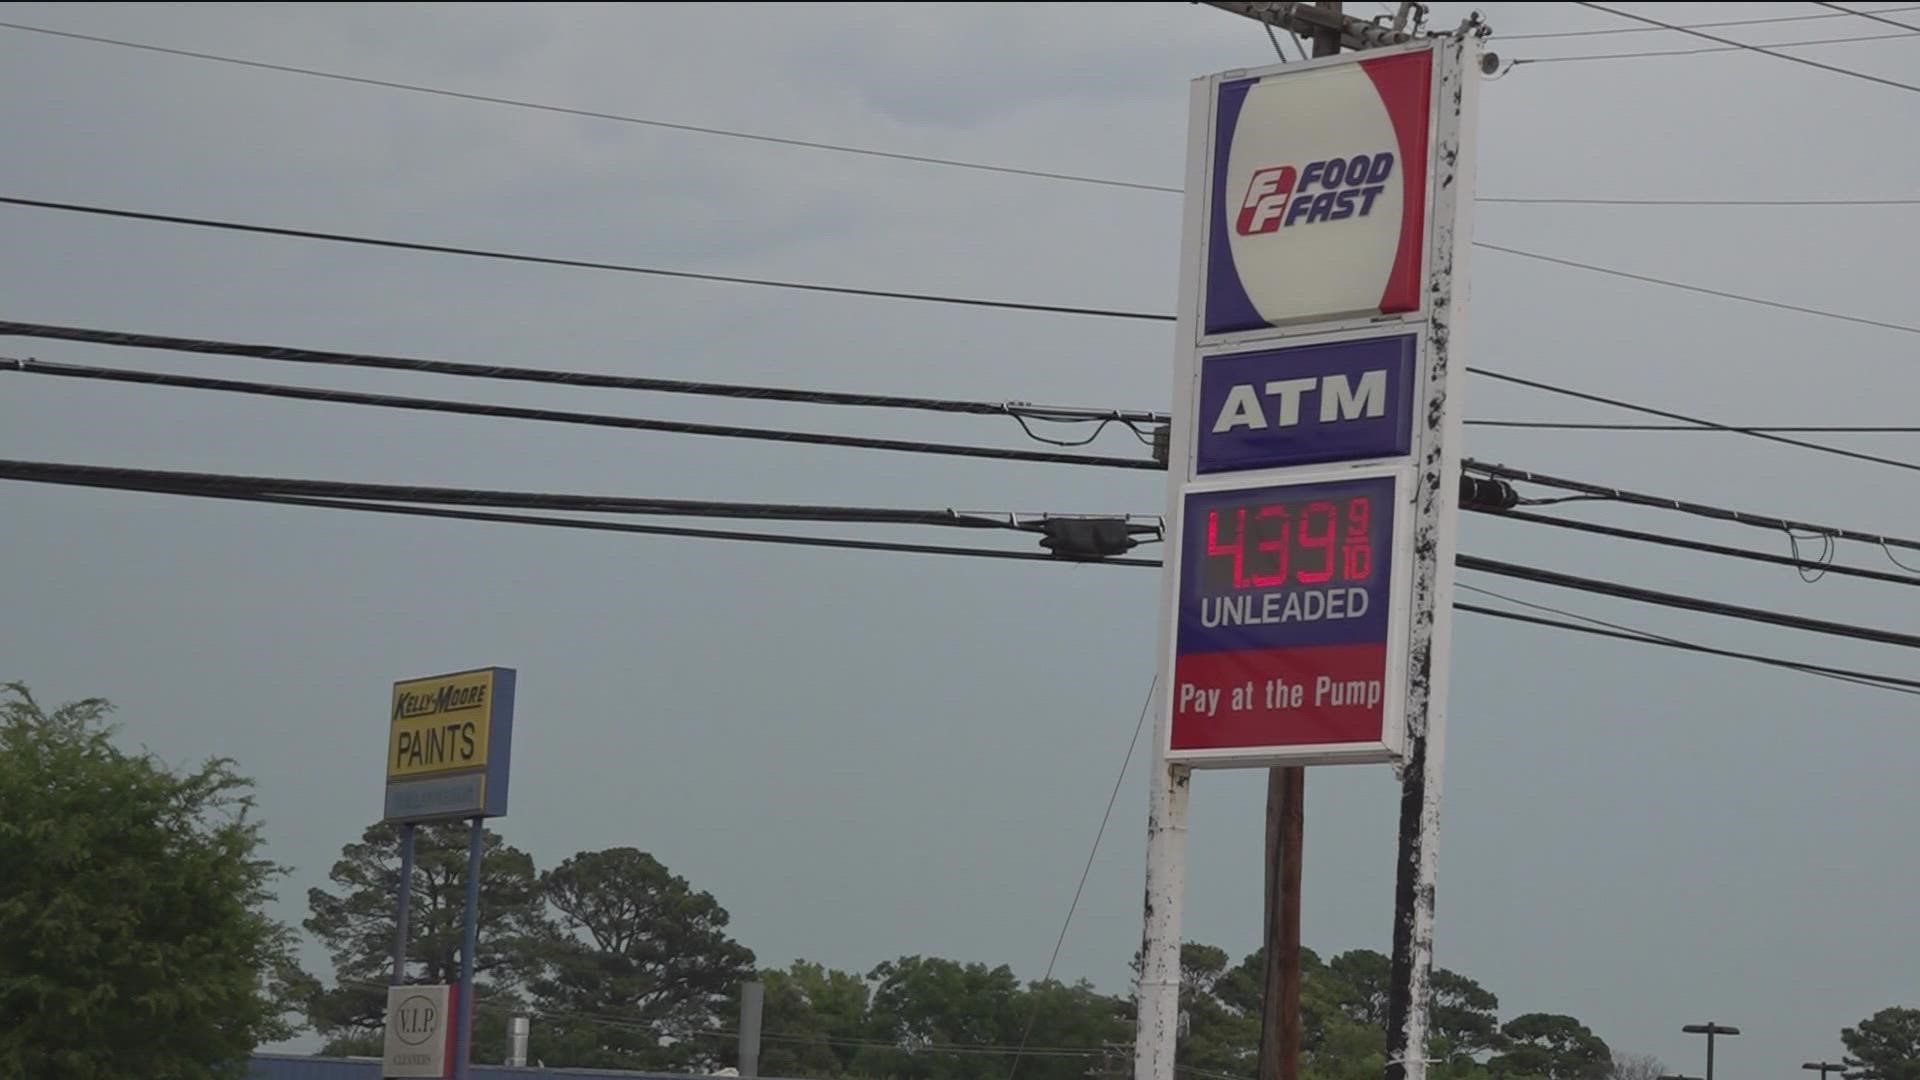 Every evening between 6-10pm, Mahi Food Mart boasts prices at least 5 cents cheaper than anywhere else in Tyler.